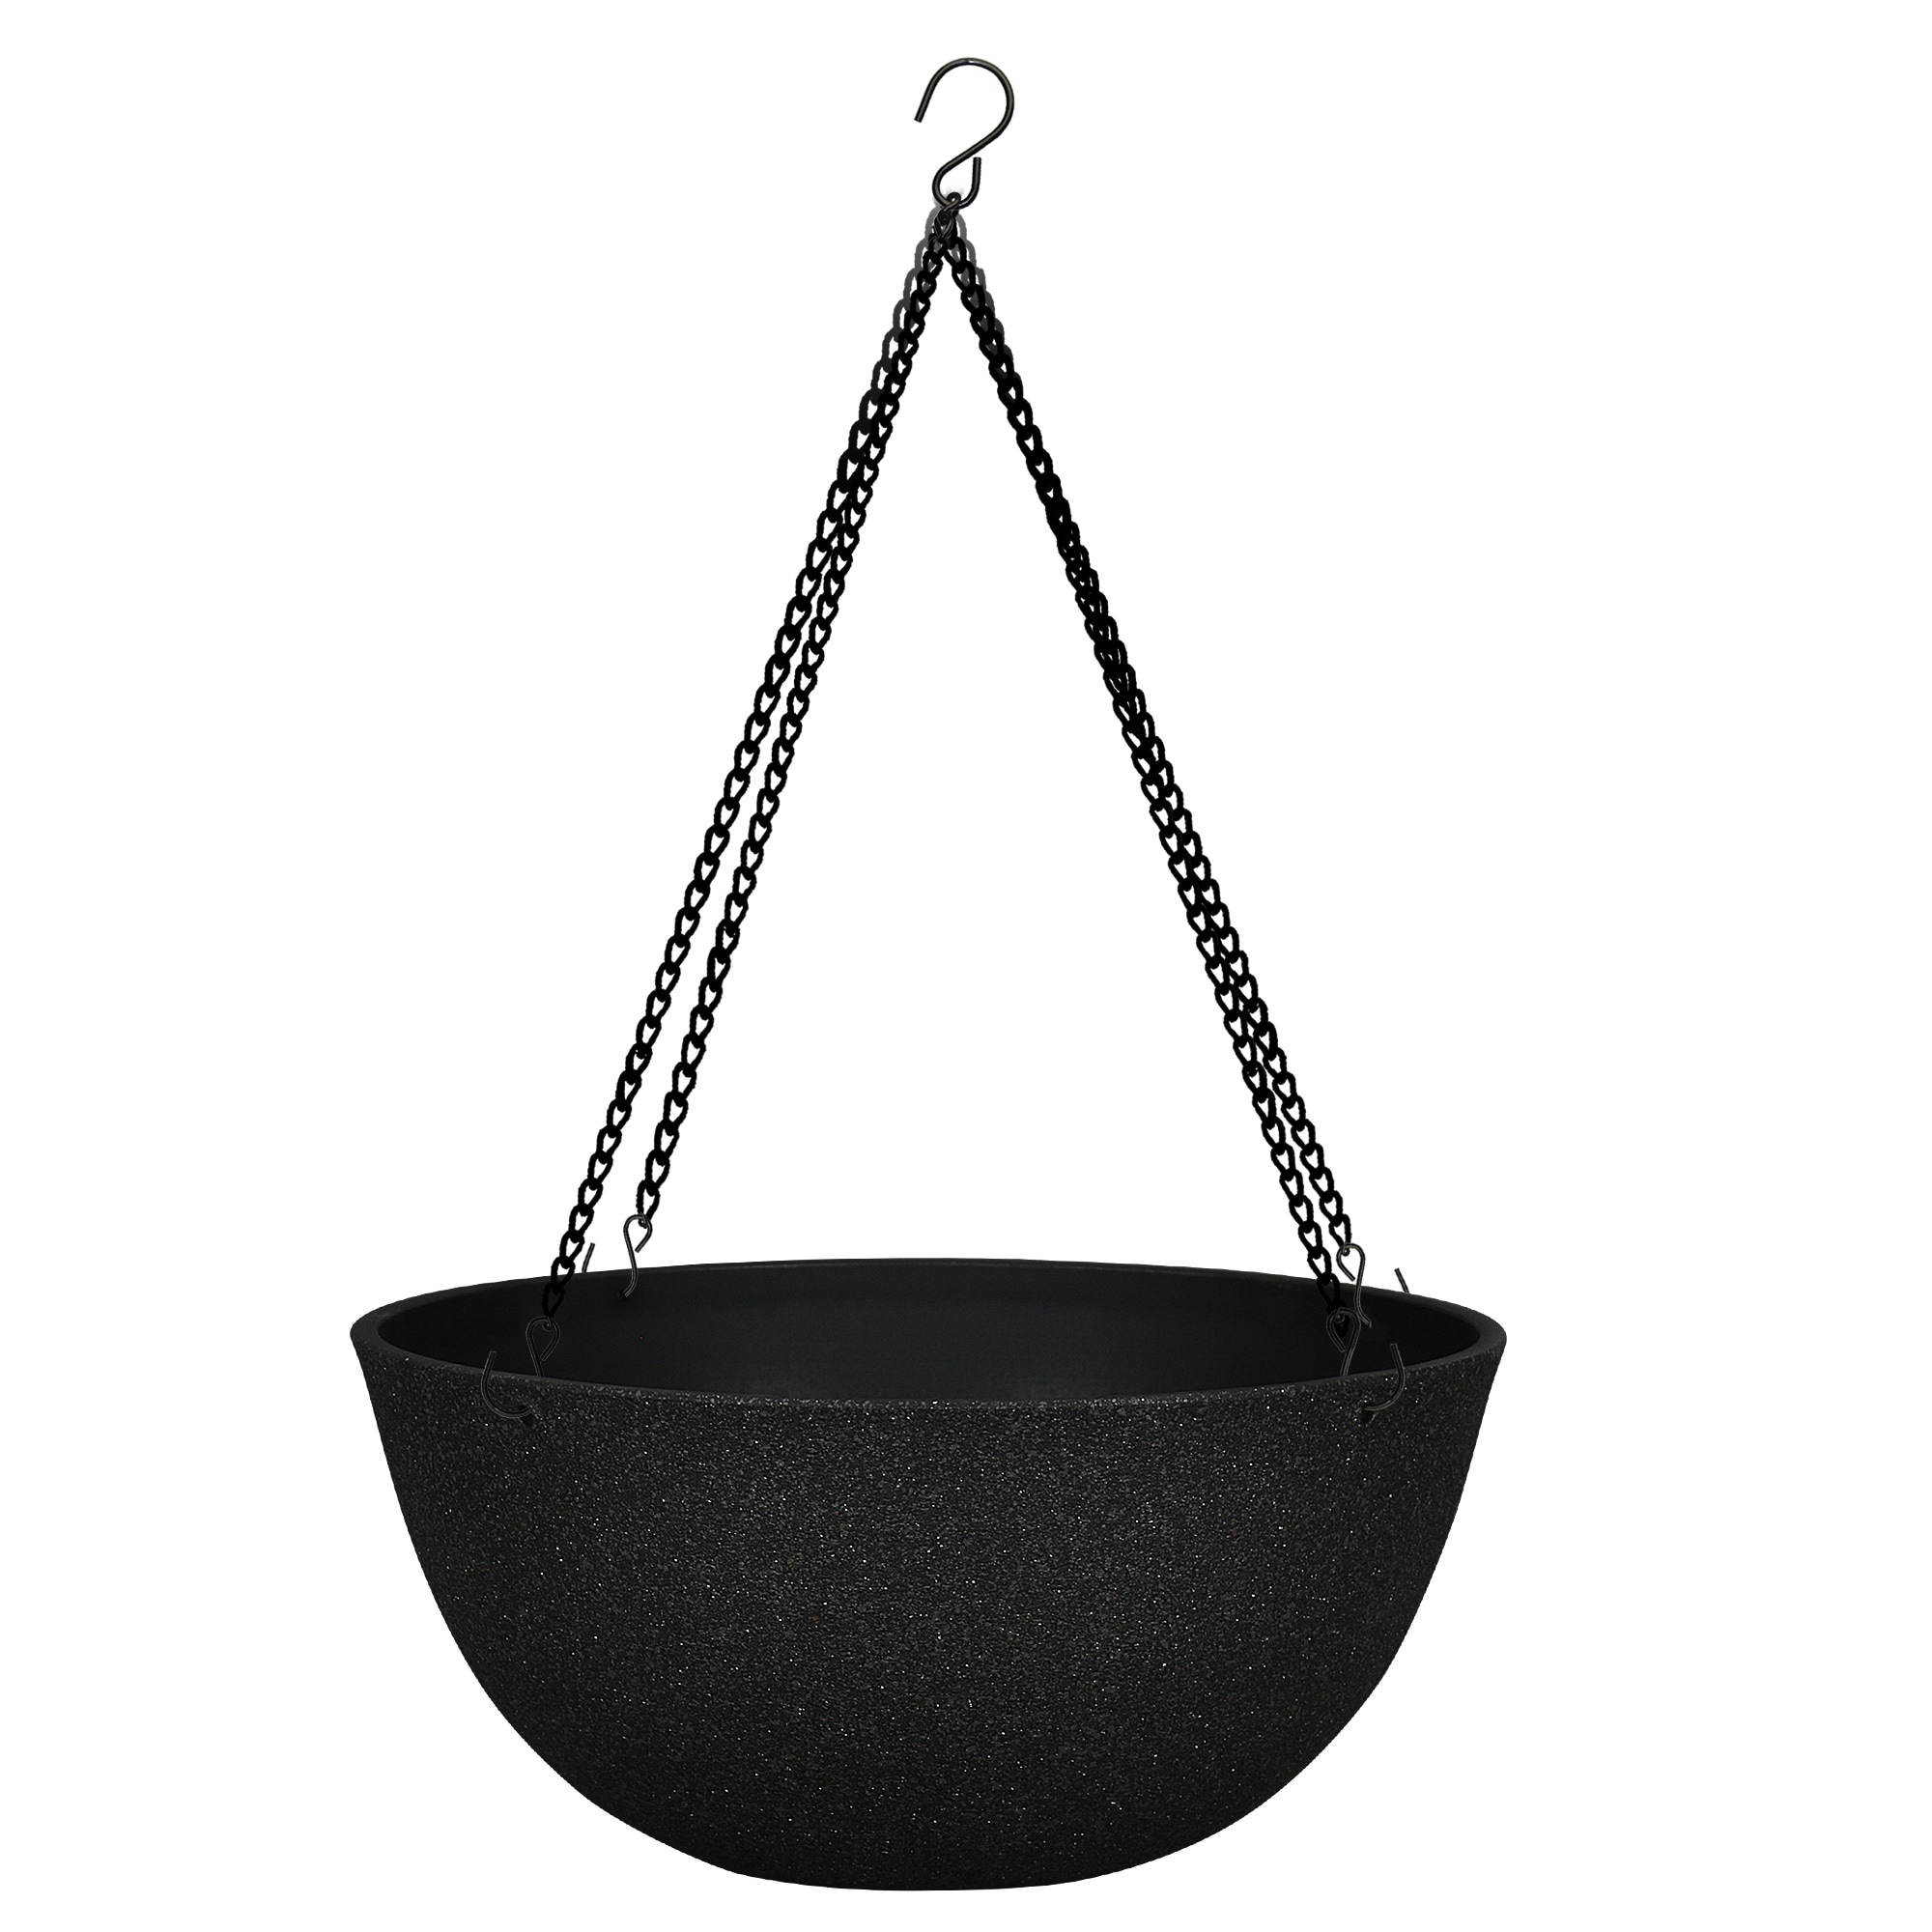 13.15-in W x 6.5-in H Black Resin Contemporary/Modern Indoor/Outdoor Hanging Planter | - allen + roth PLGY314SKG